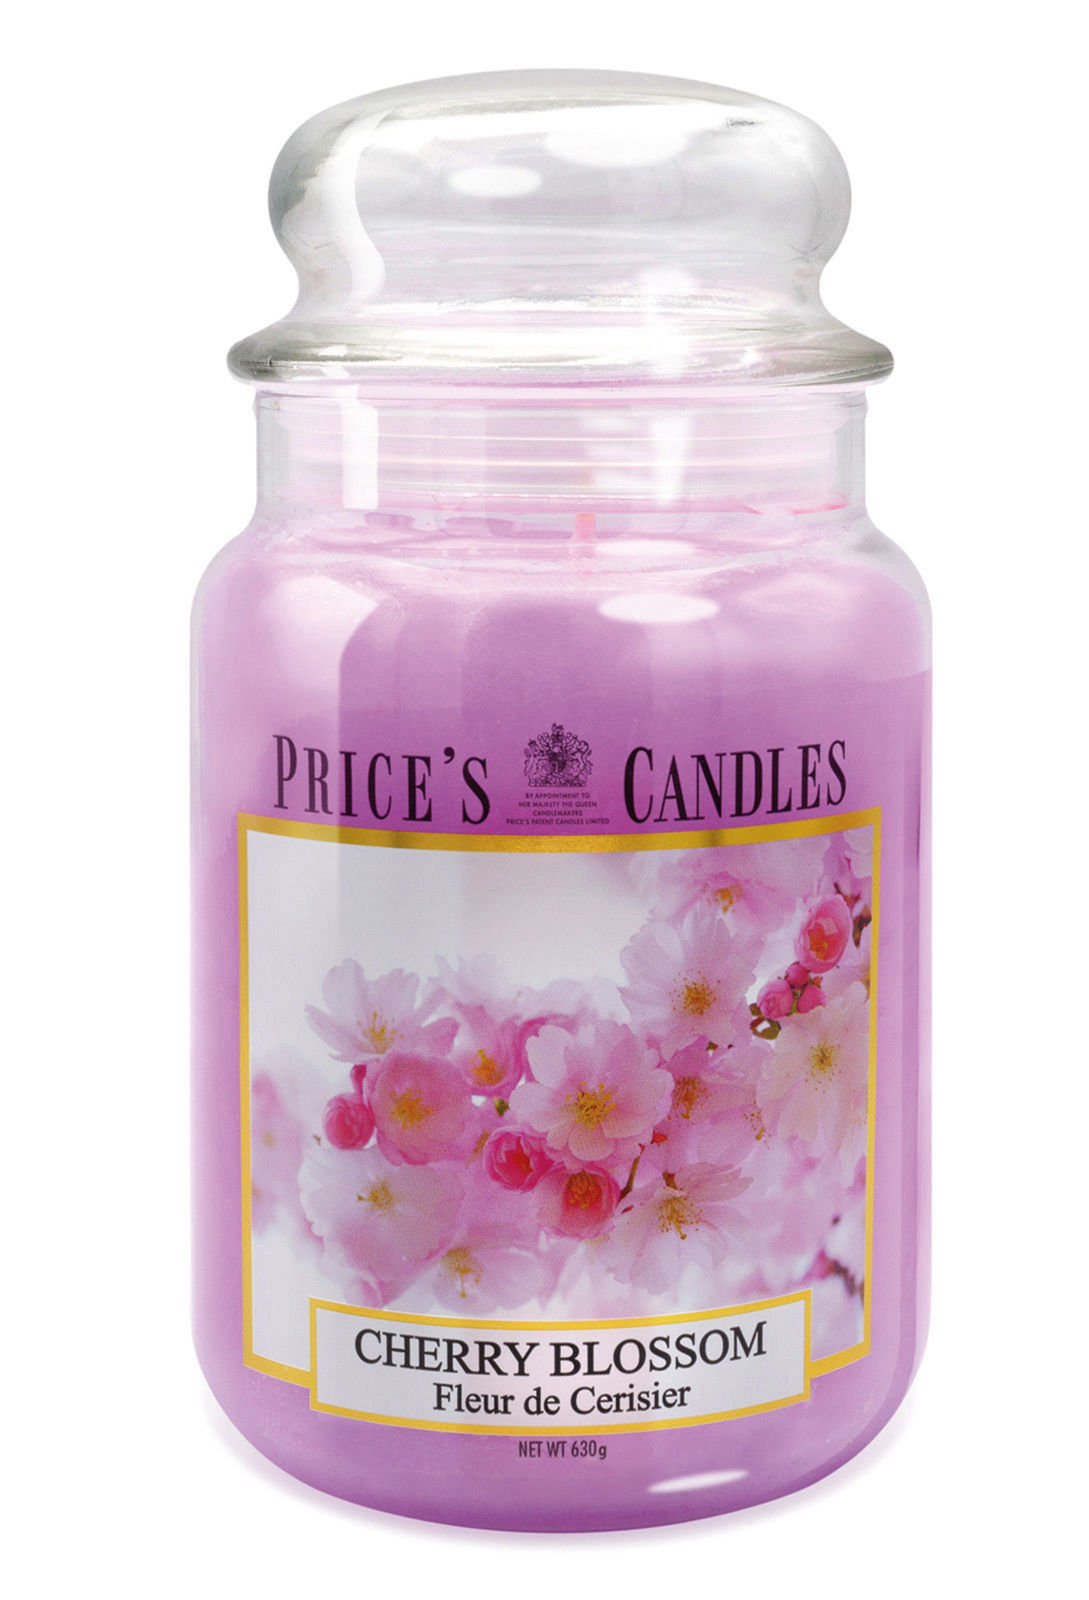 Prices Candle "Cherry Blossom" 630g  